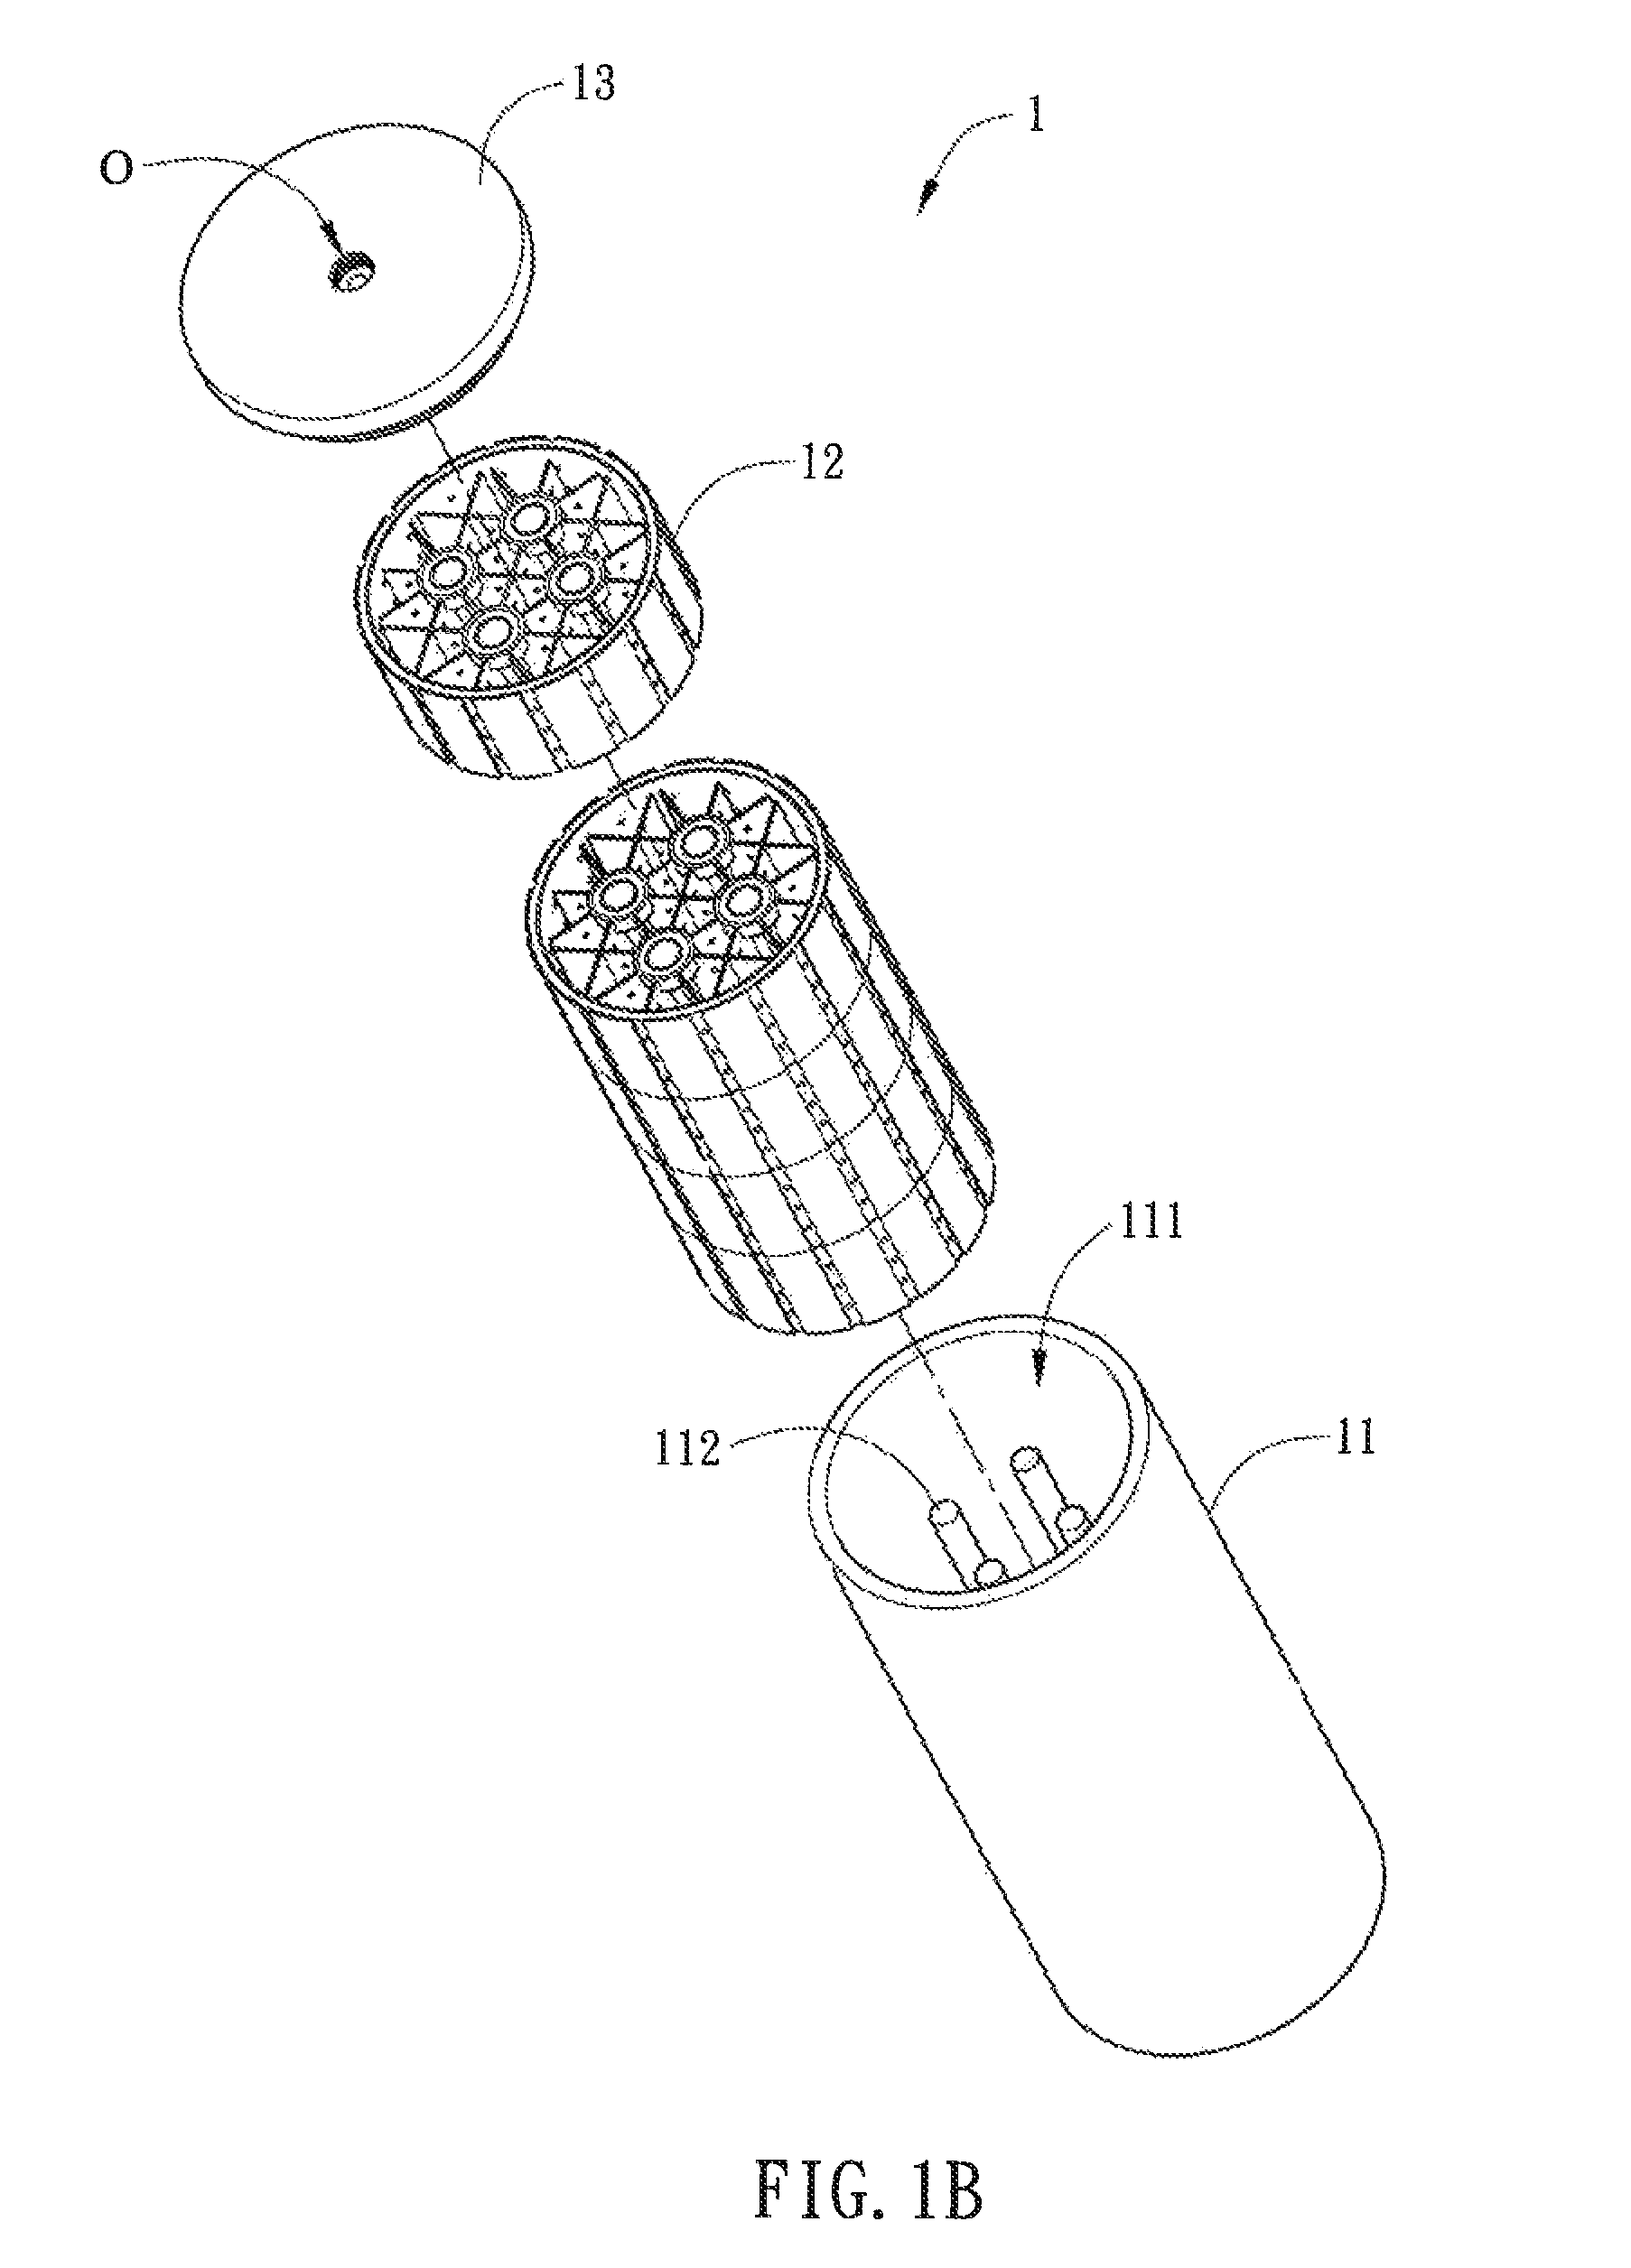 Hydrogen storage apparatus with heat-dissipating structure